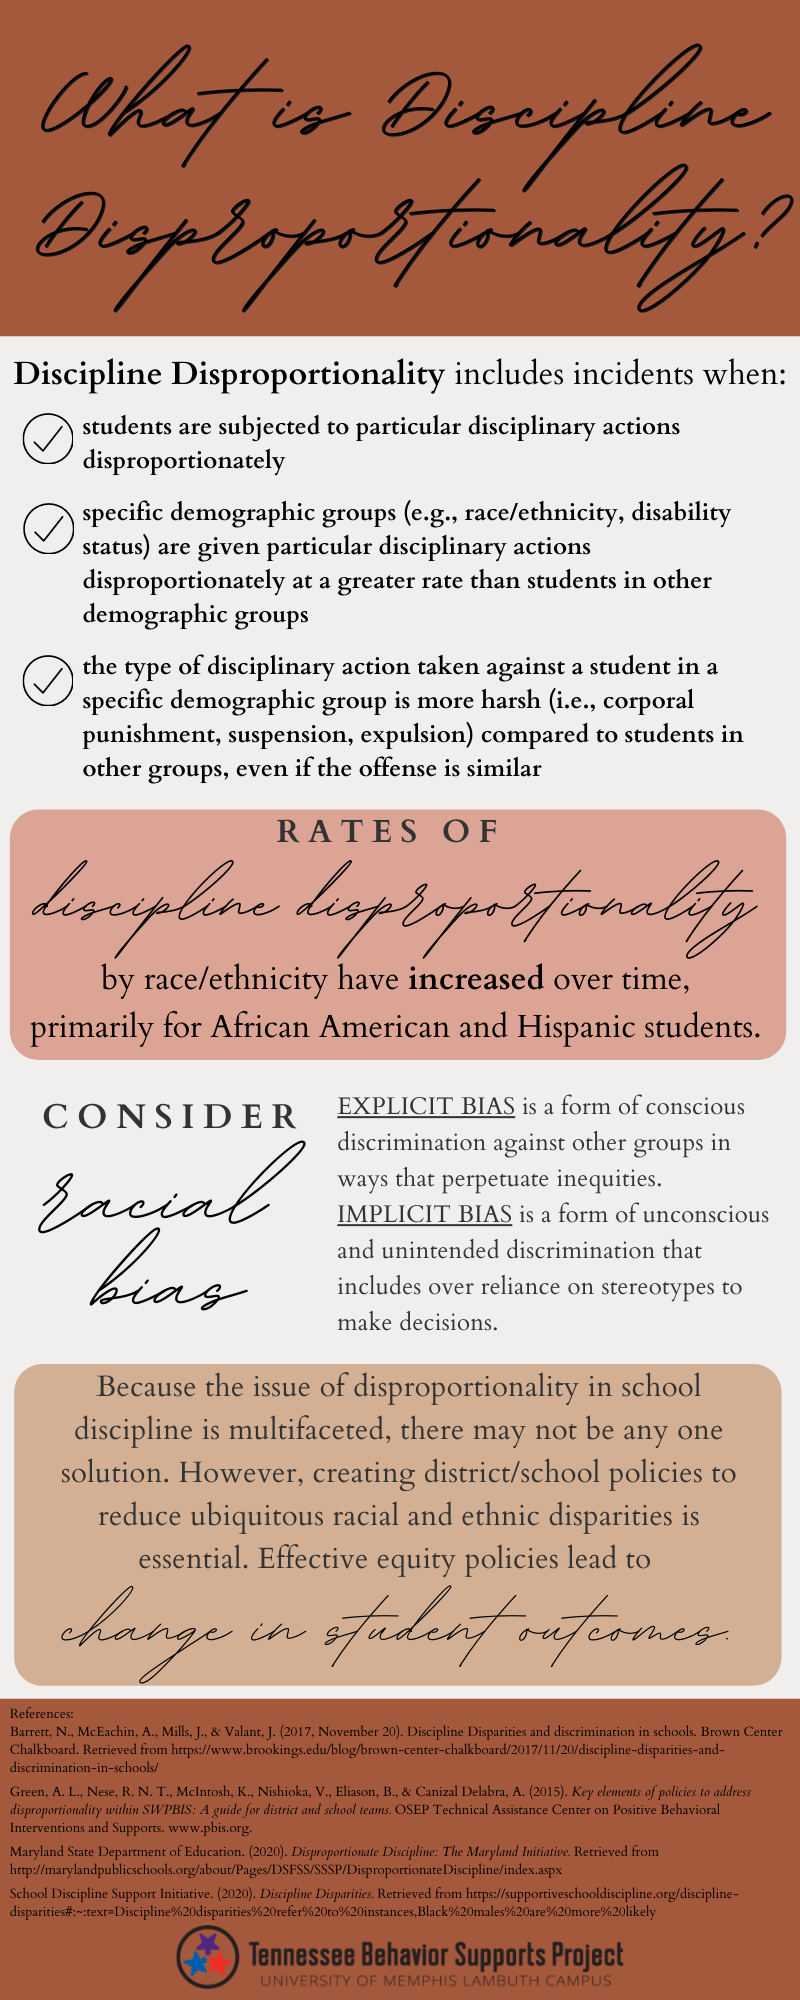 Infographic: What is Disproportionate Discipline? Click to download a PDF version of this image.